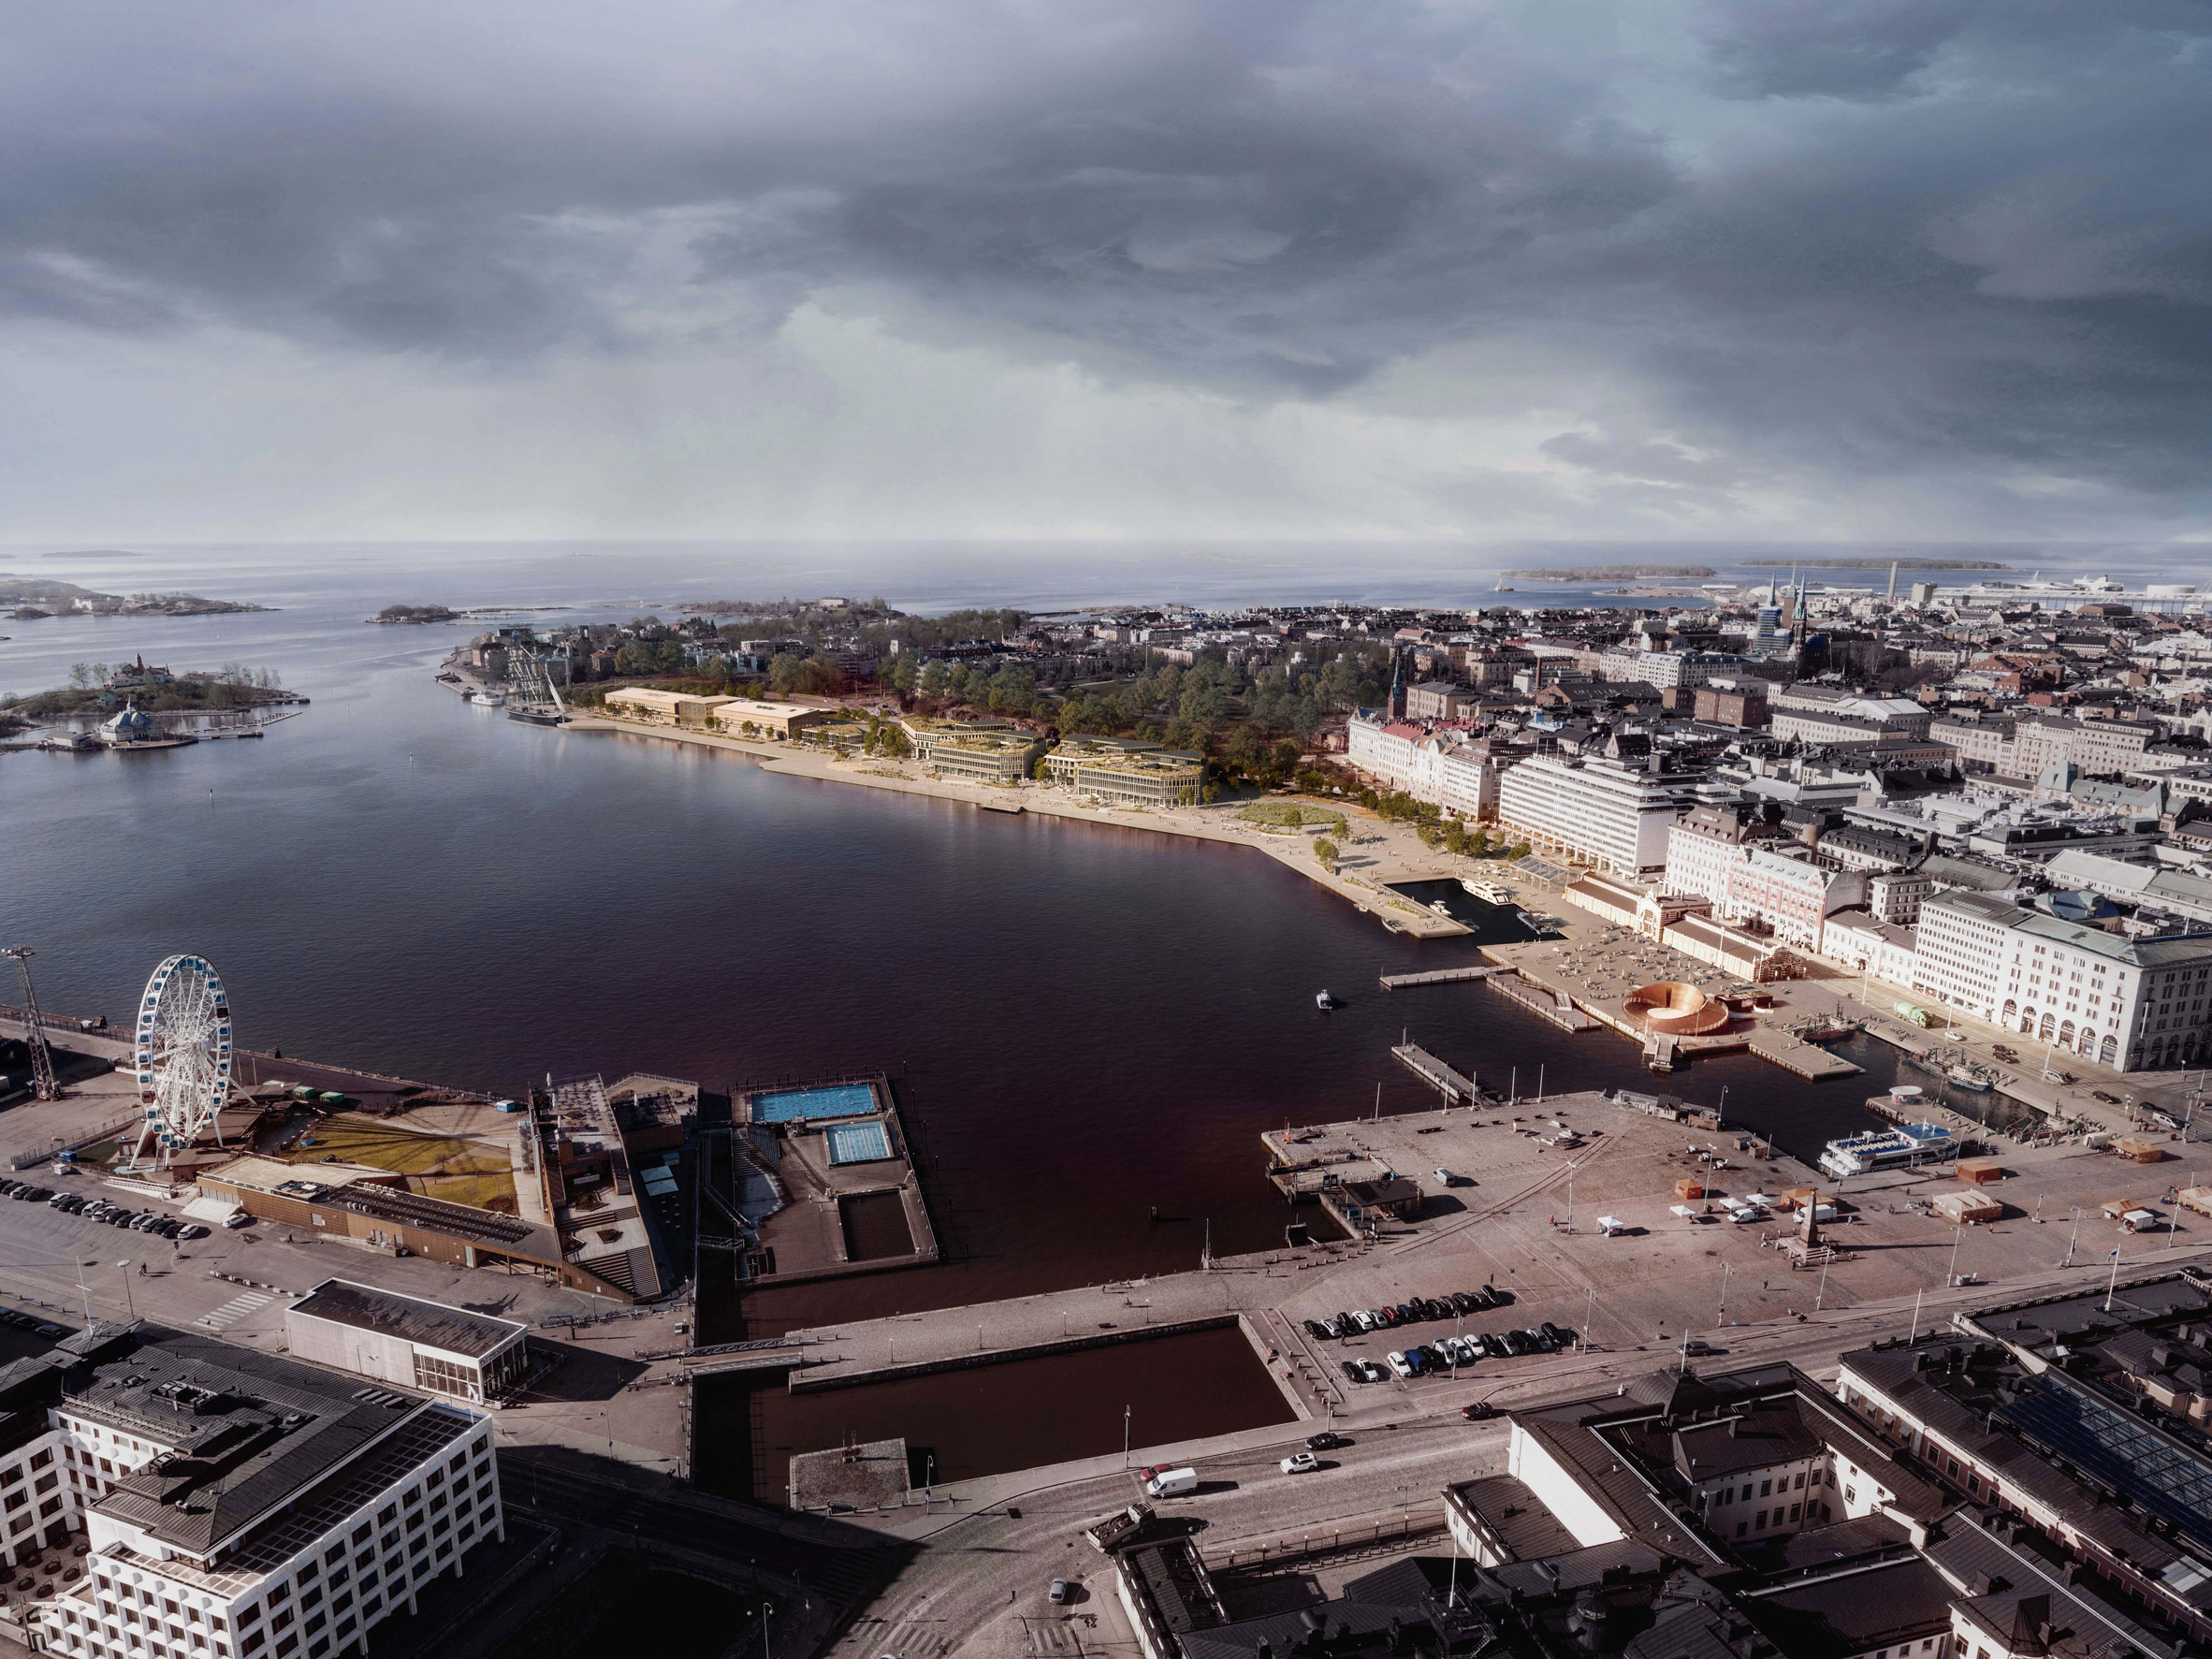 Rendering of an aerial view of Helsinki's harbour including the Makasiiniranta redevelopment